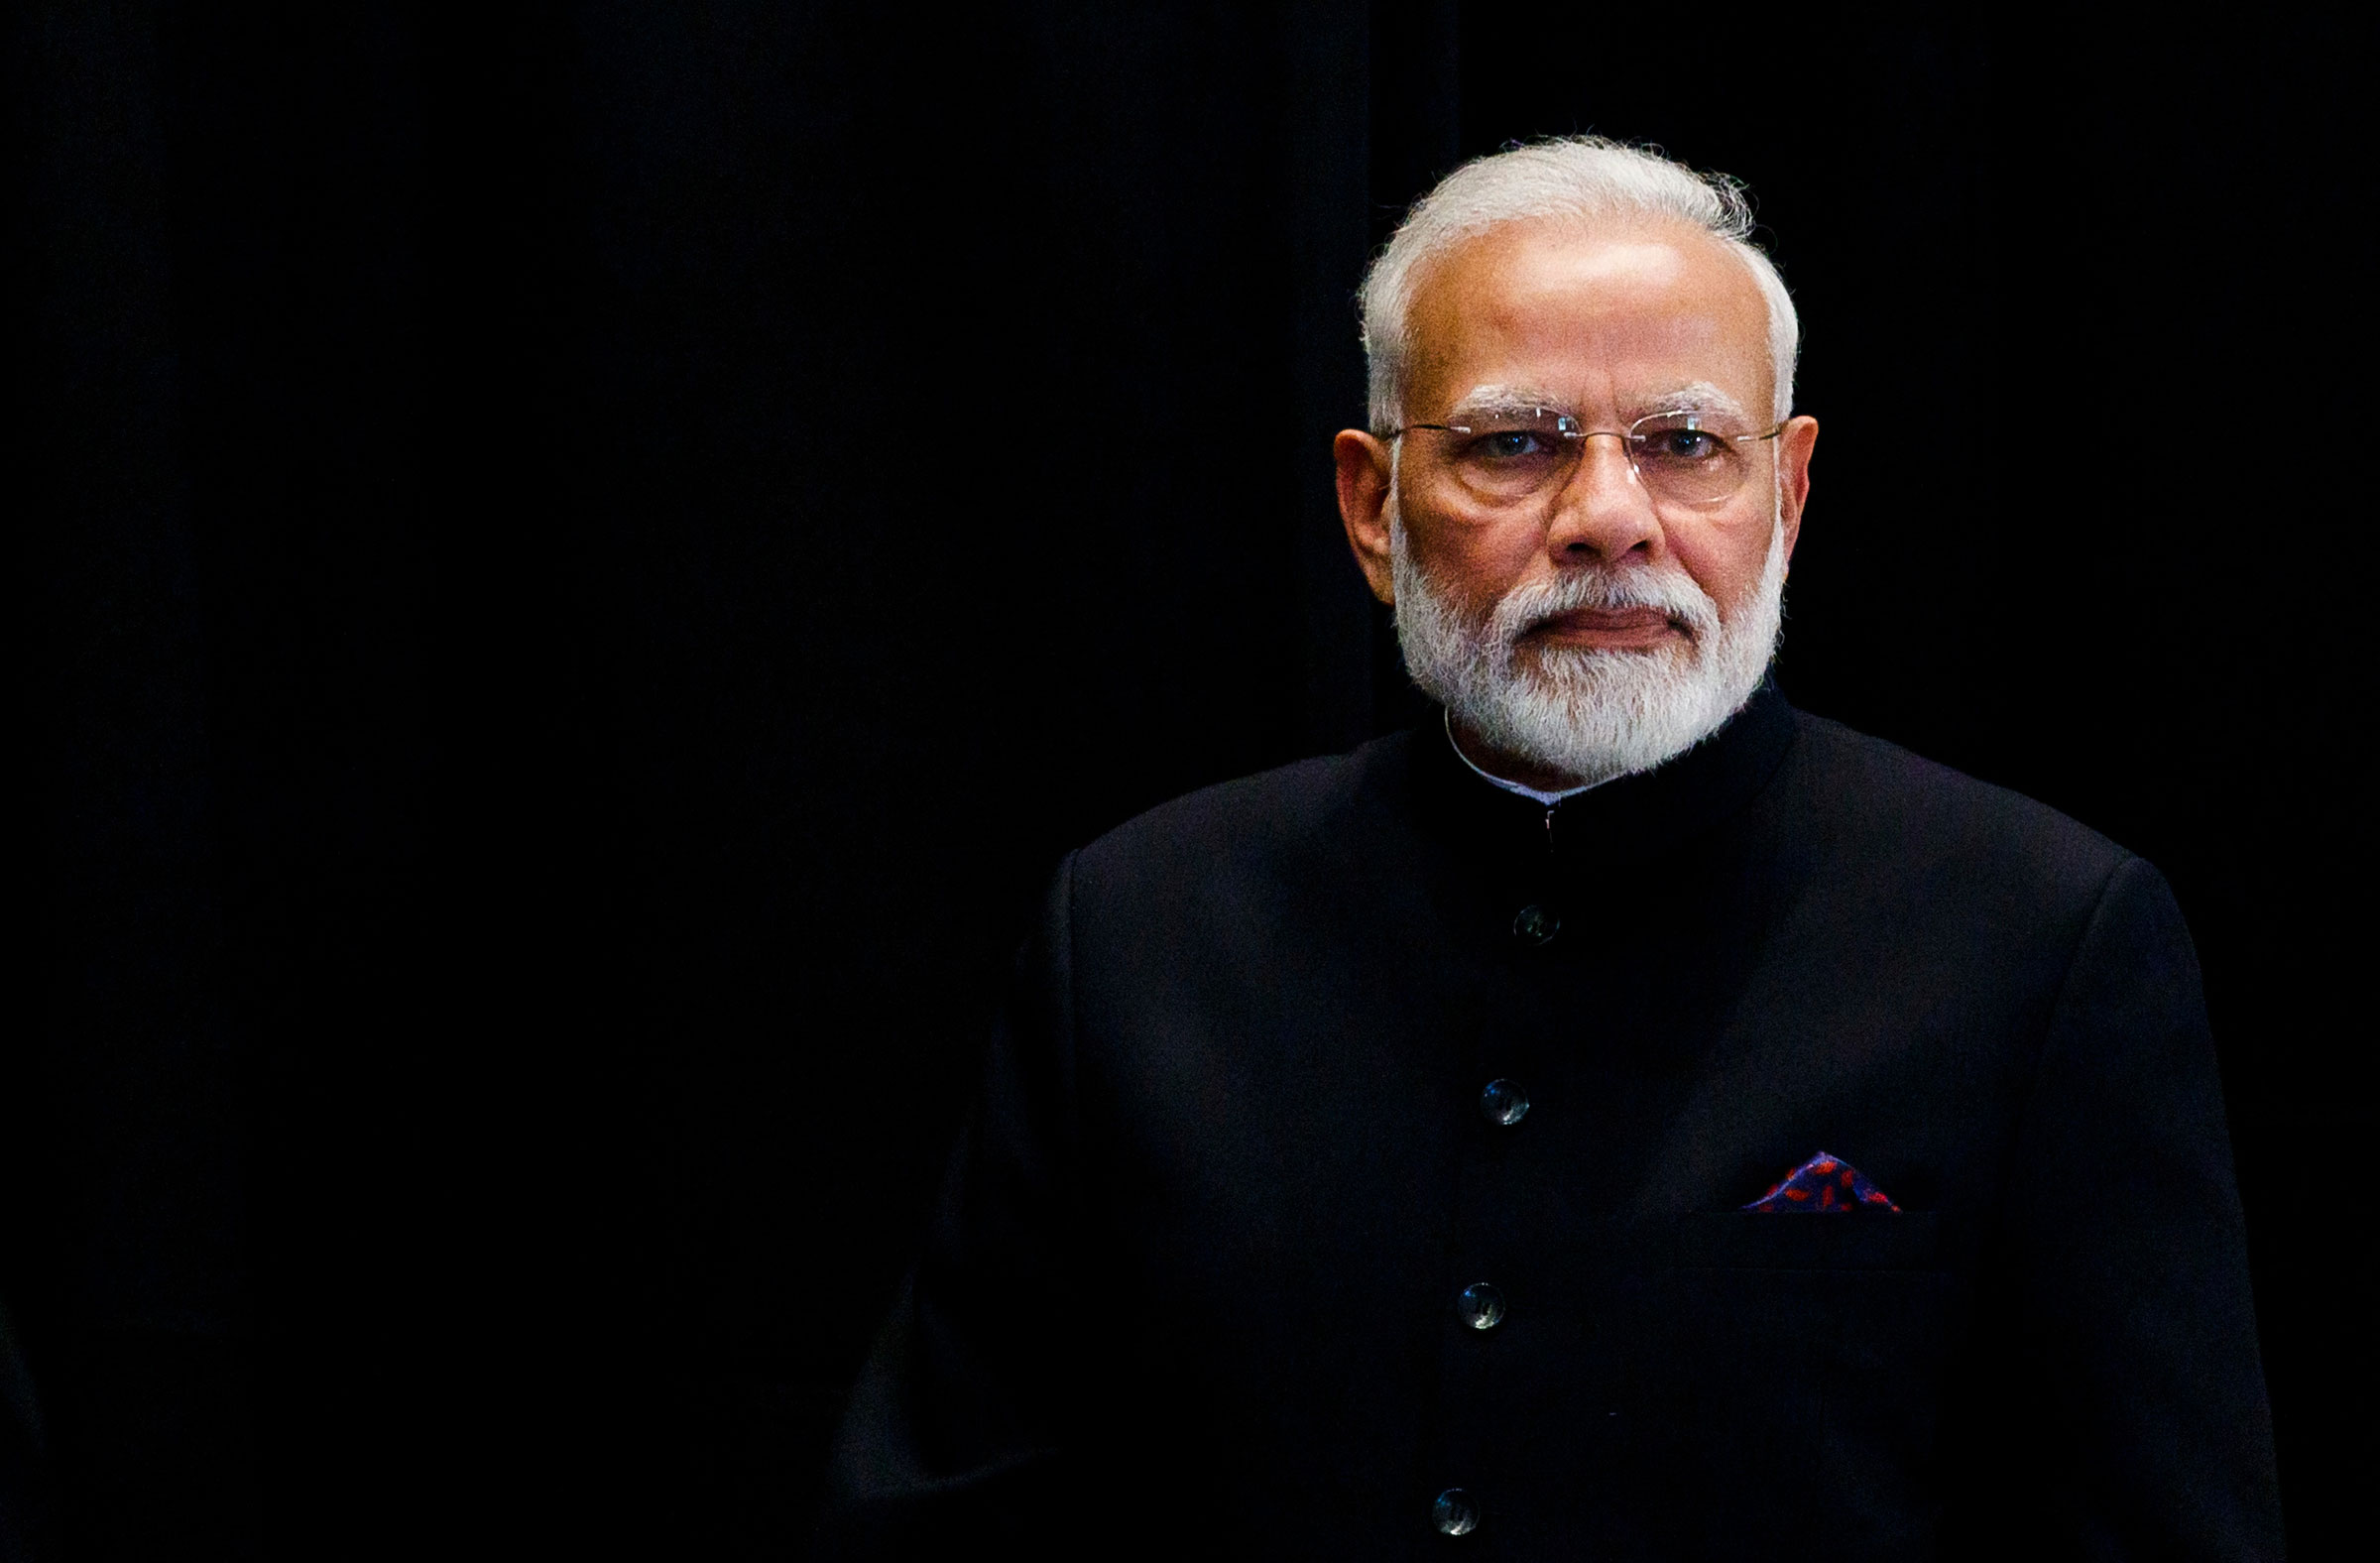 Narendra Modi Is on the 2020 TIME 100 List | TIME